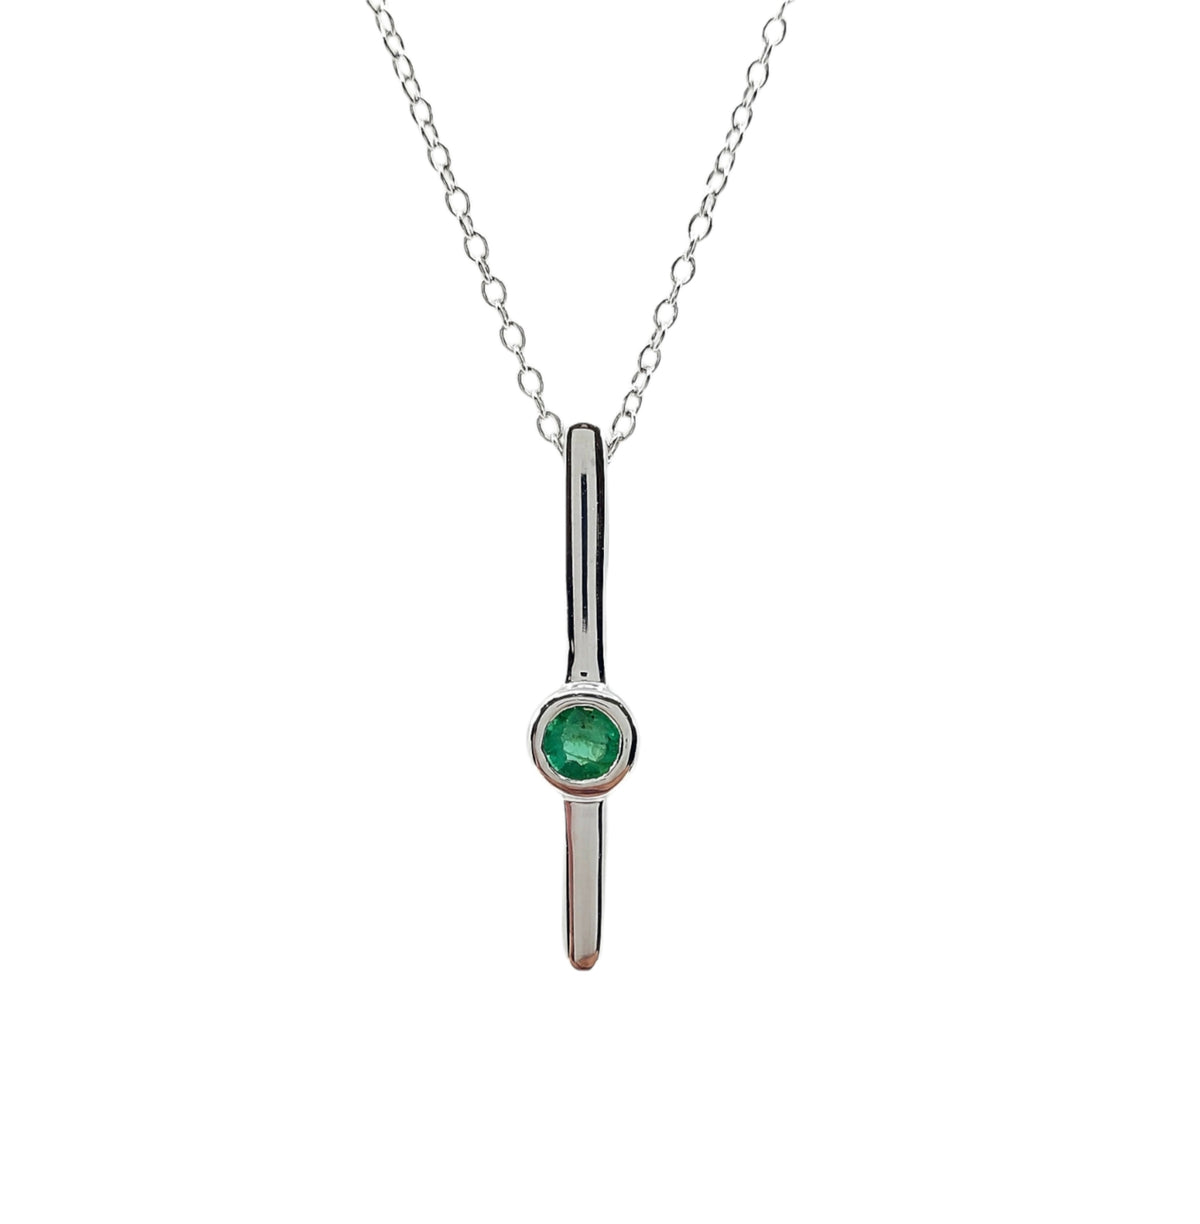 10K White Gold 0.07cttw (2.50mm) Emerald and 0.05cttw Diamond Necklace with Cable Chain (Spring Clasp) - Adjustable 17 - 18 Inches